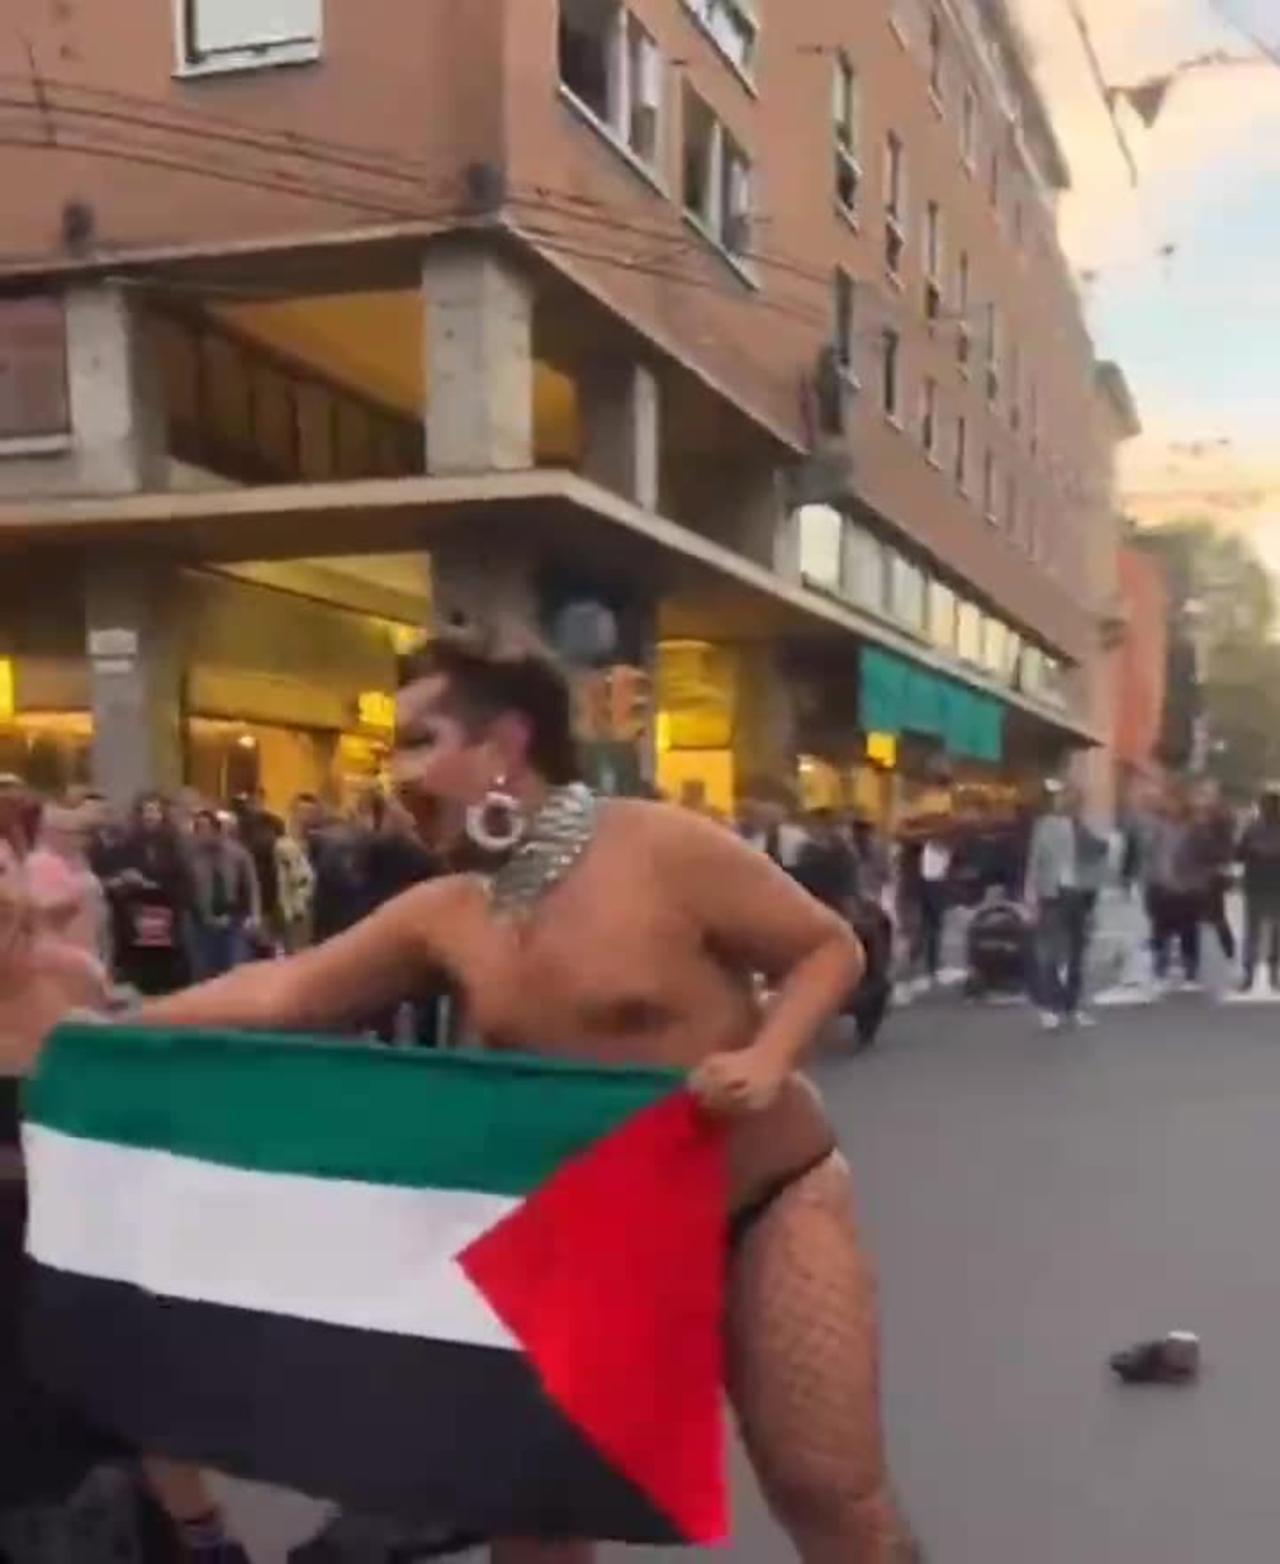 Palestine won't welcome despite their support, but the world's gayest city, Tel Aviv will!